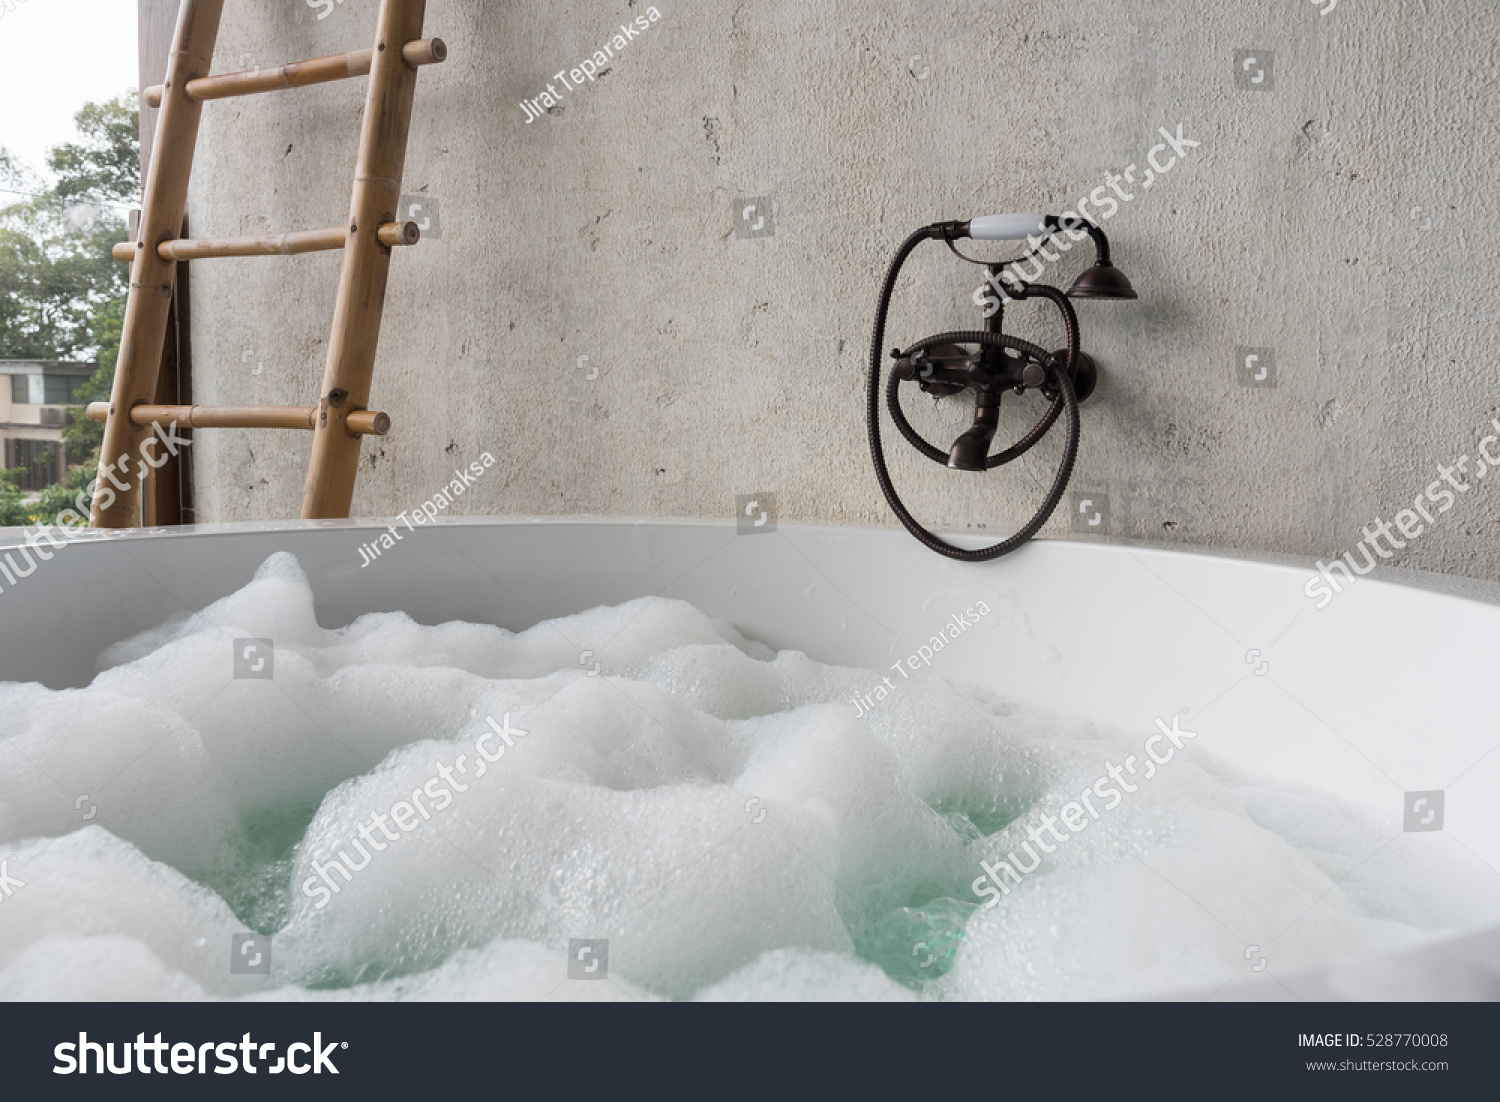 Old Fashion Faucet Over Jacuzzi Bath Stock Photo Edit Now 528770008